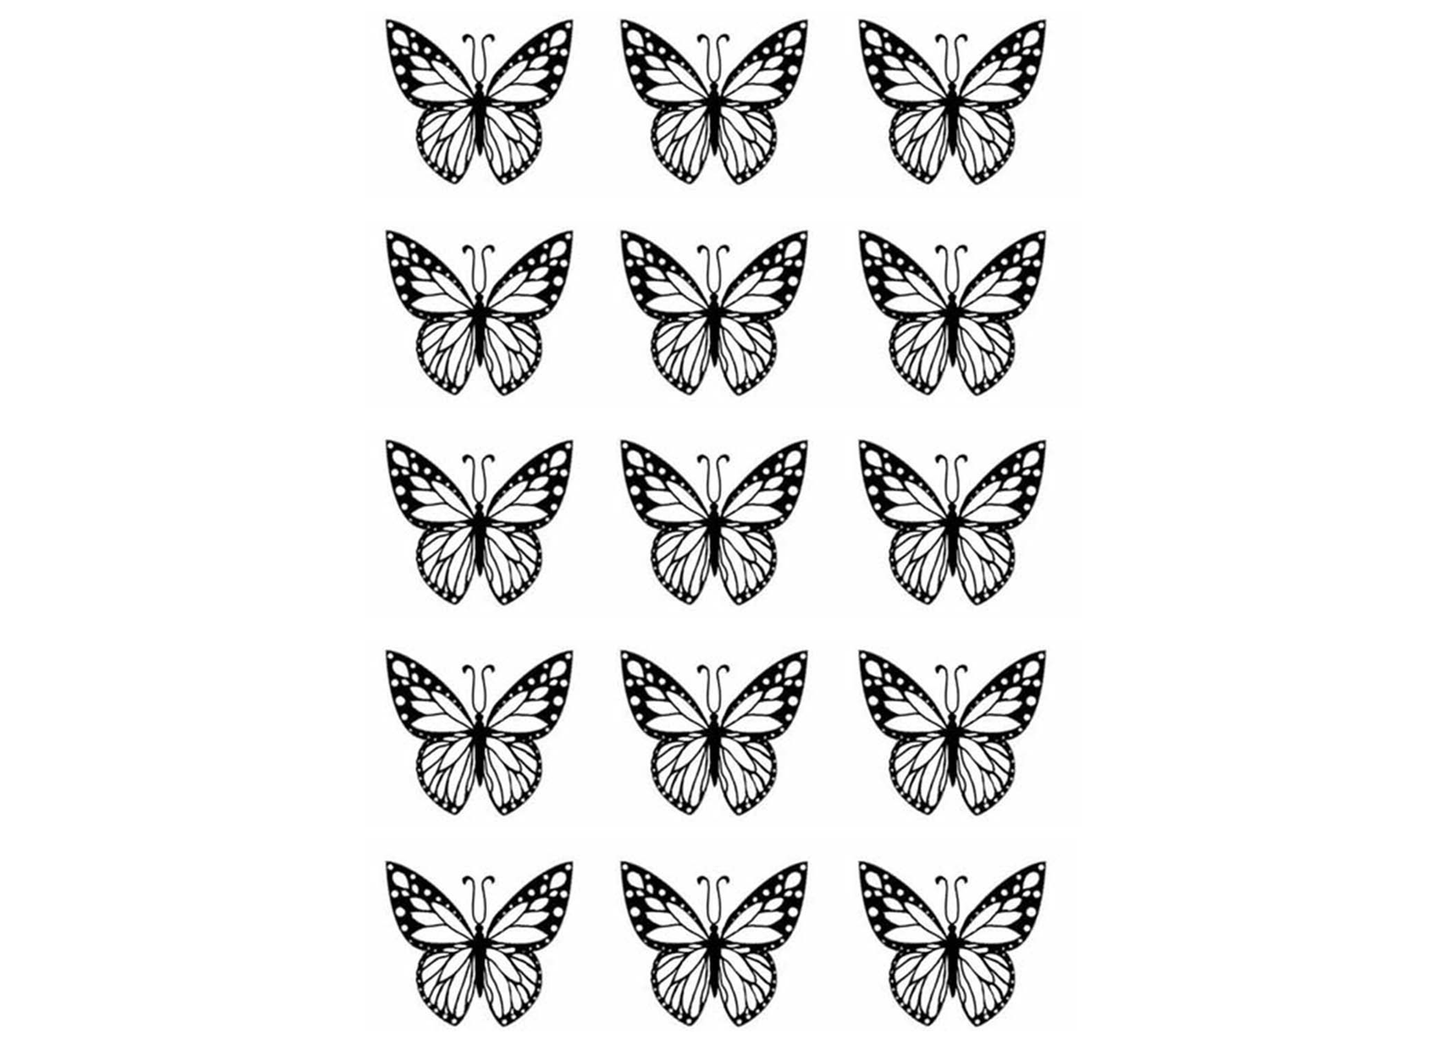 Butterfly Butterflies 15 Pcs 1" Black Fused Glass Decals